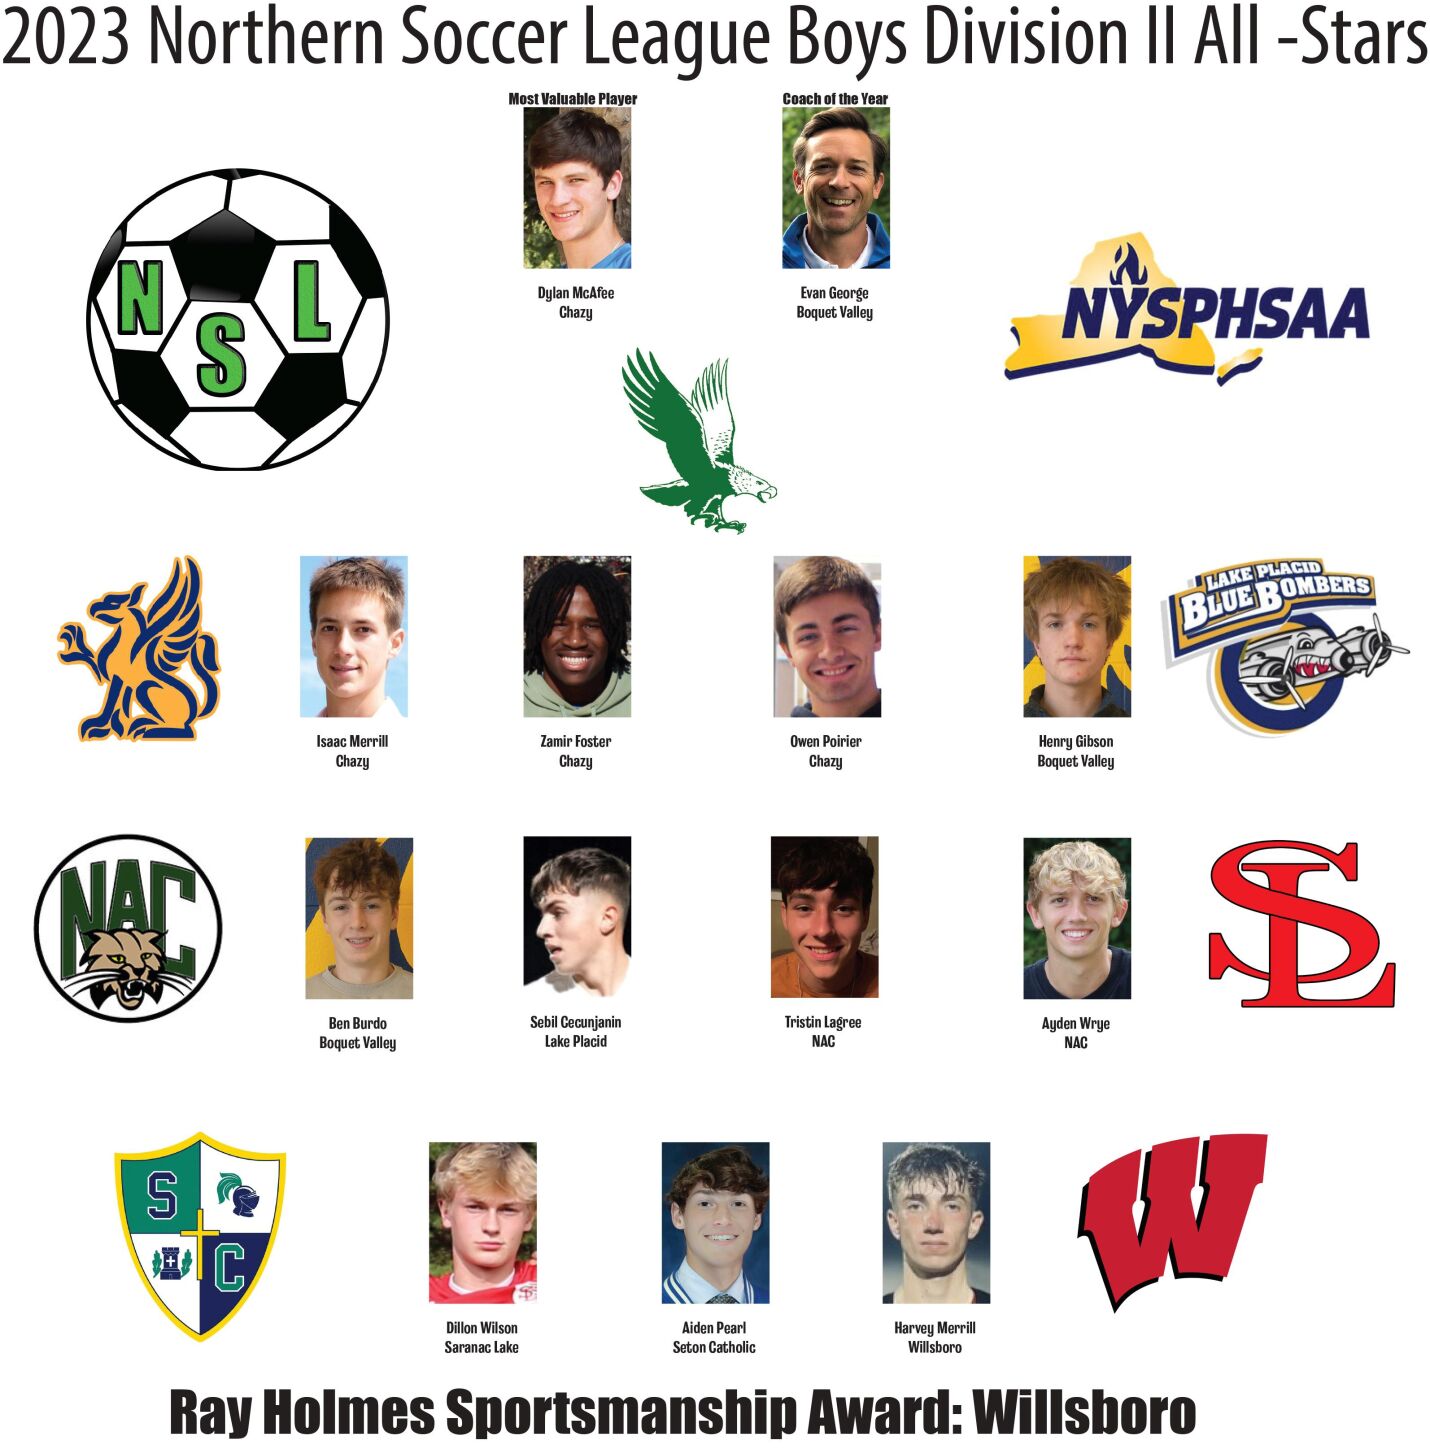 Northern Soccer League 2023 All-Stars and Division II Awards Revealed